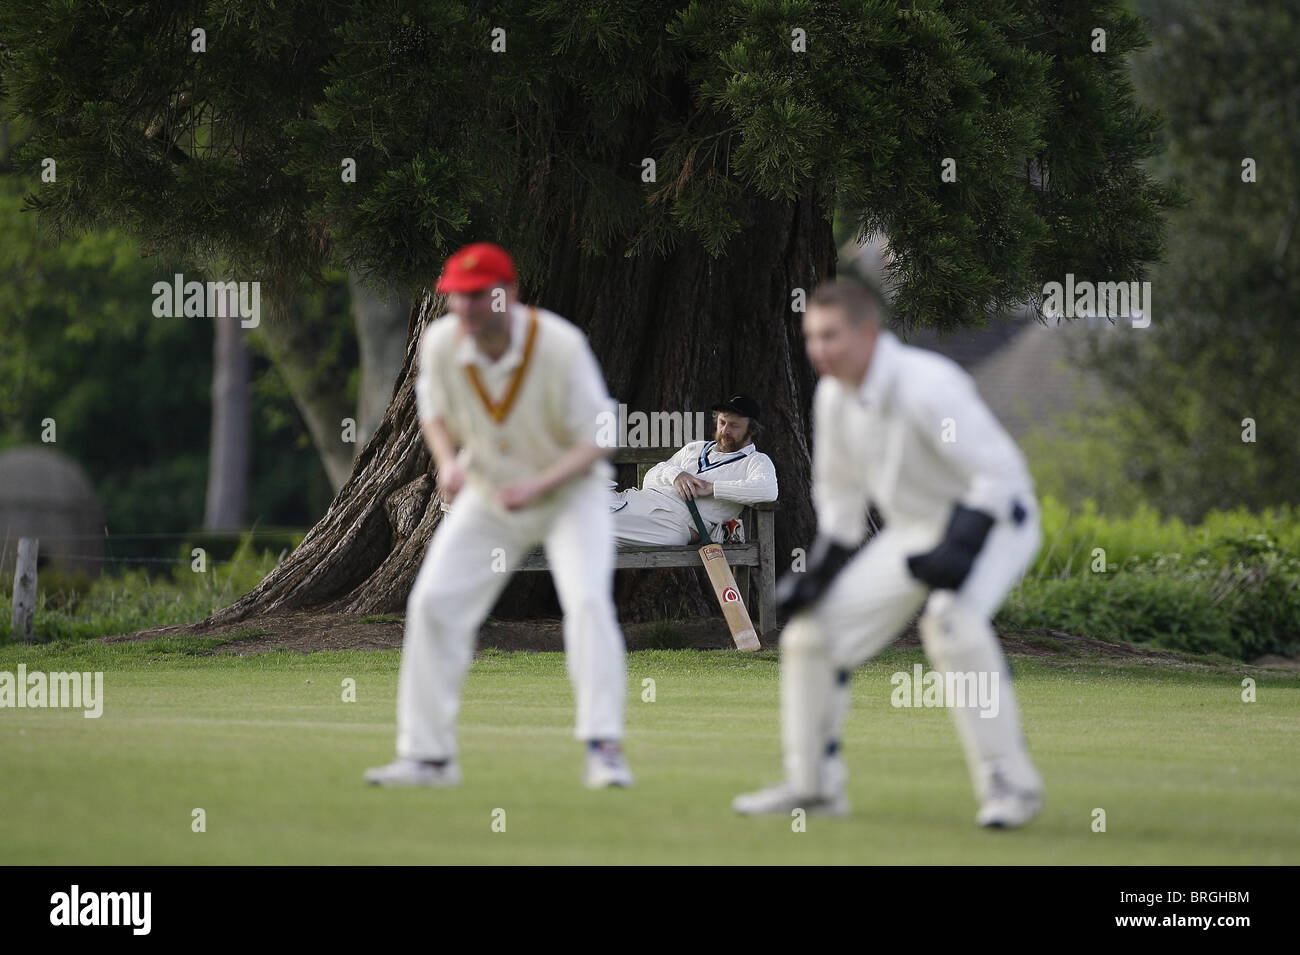 A Cricketer relaxes while watching a village match. Picture by James Boardman. Stock Photo